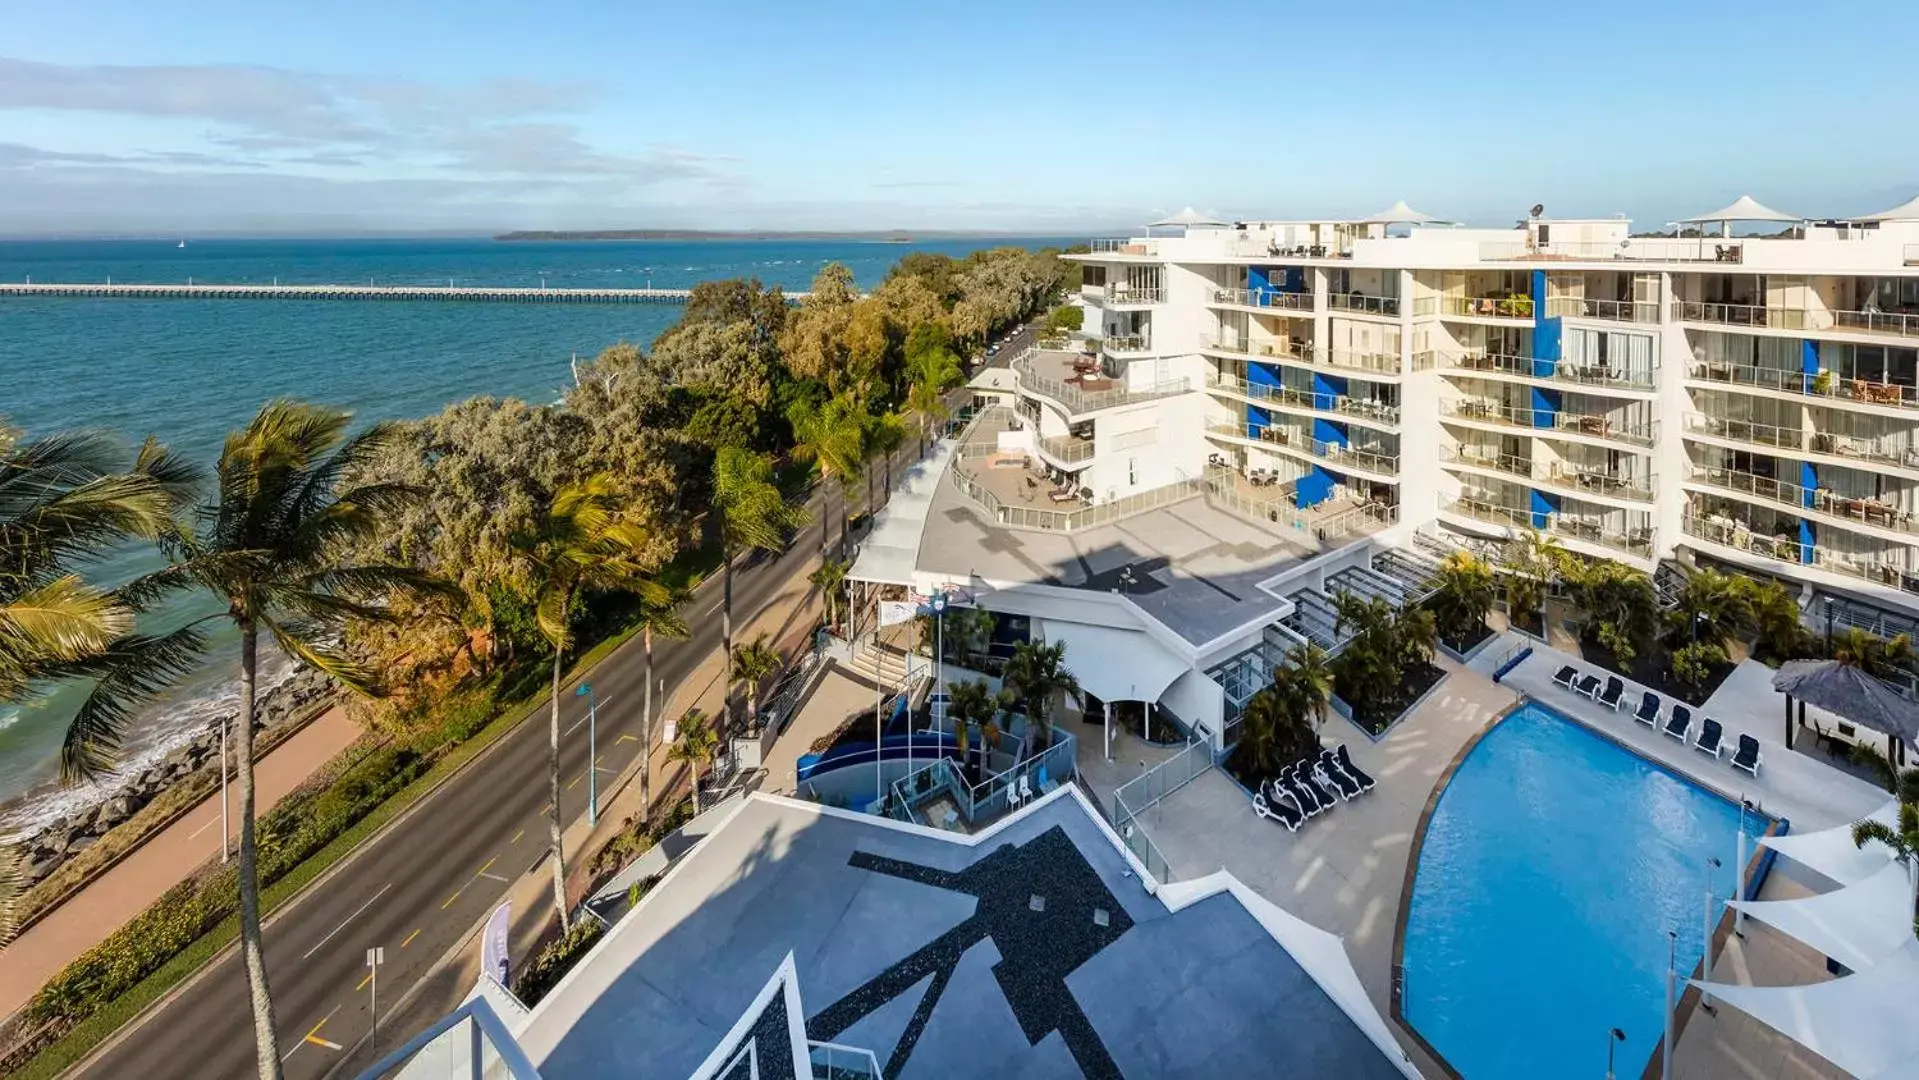 Property building, Pool View in Oaks Hervey Bay Resort and Spa